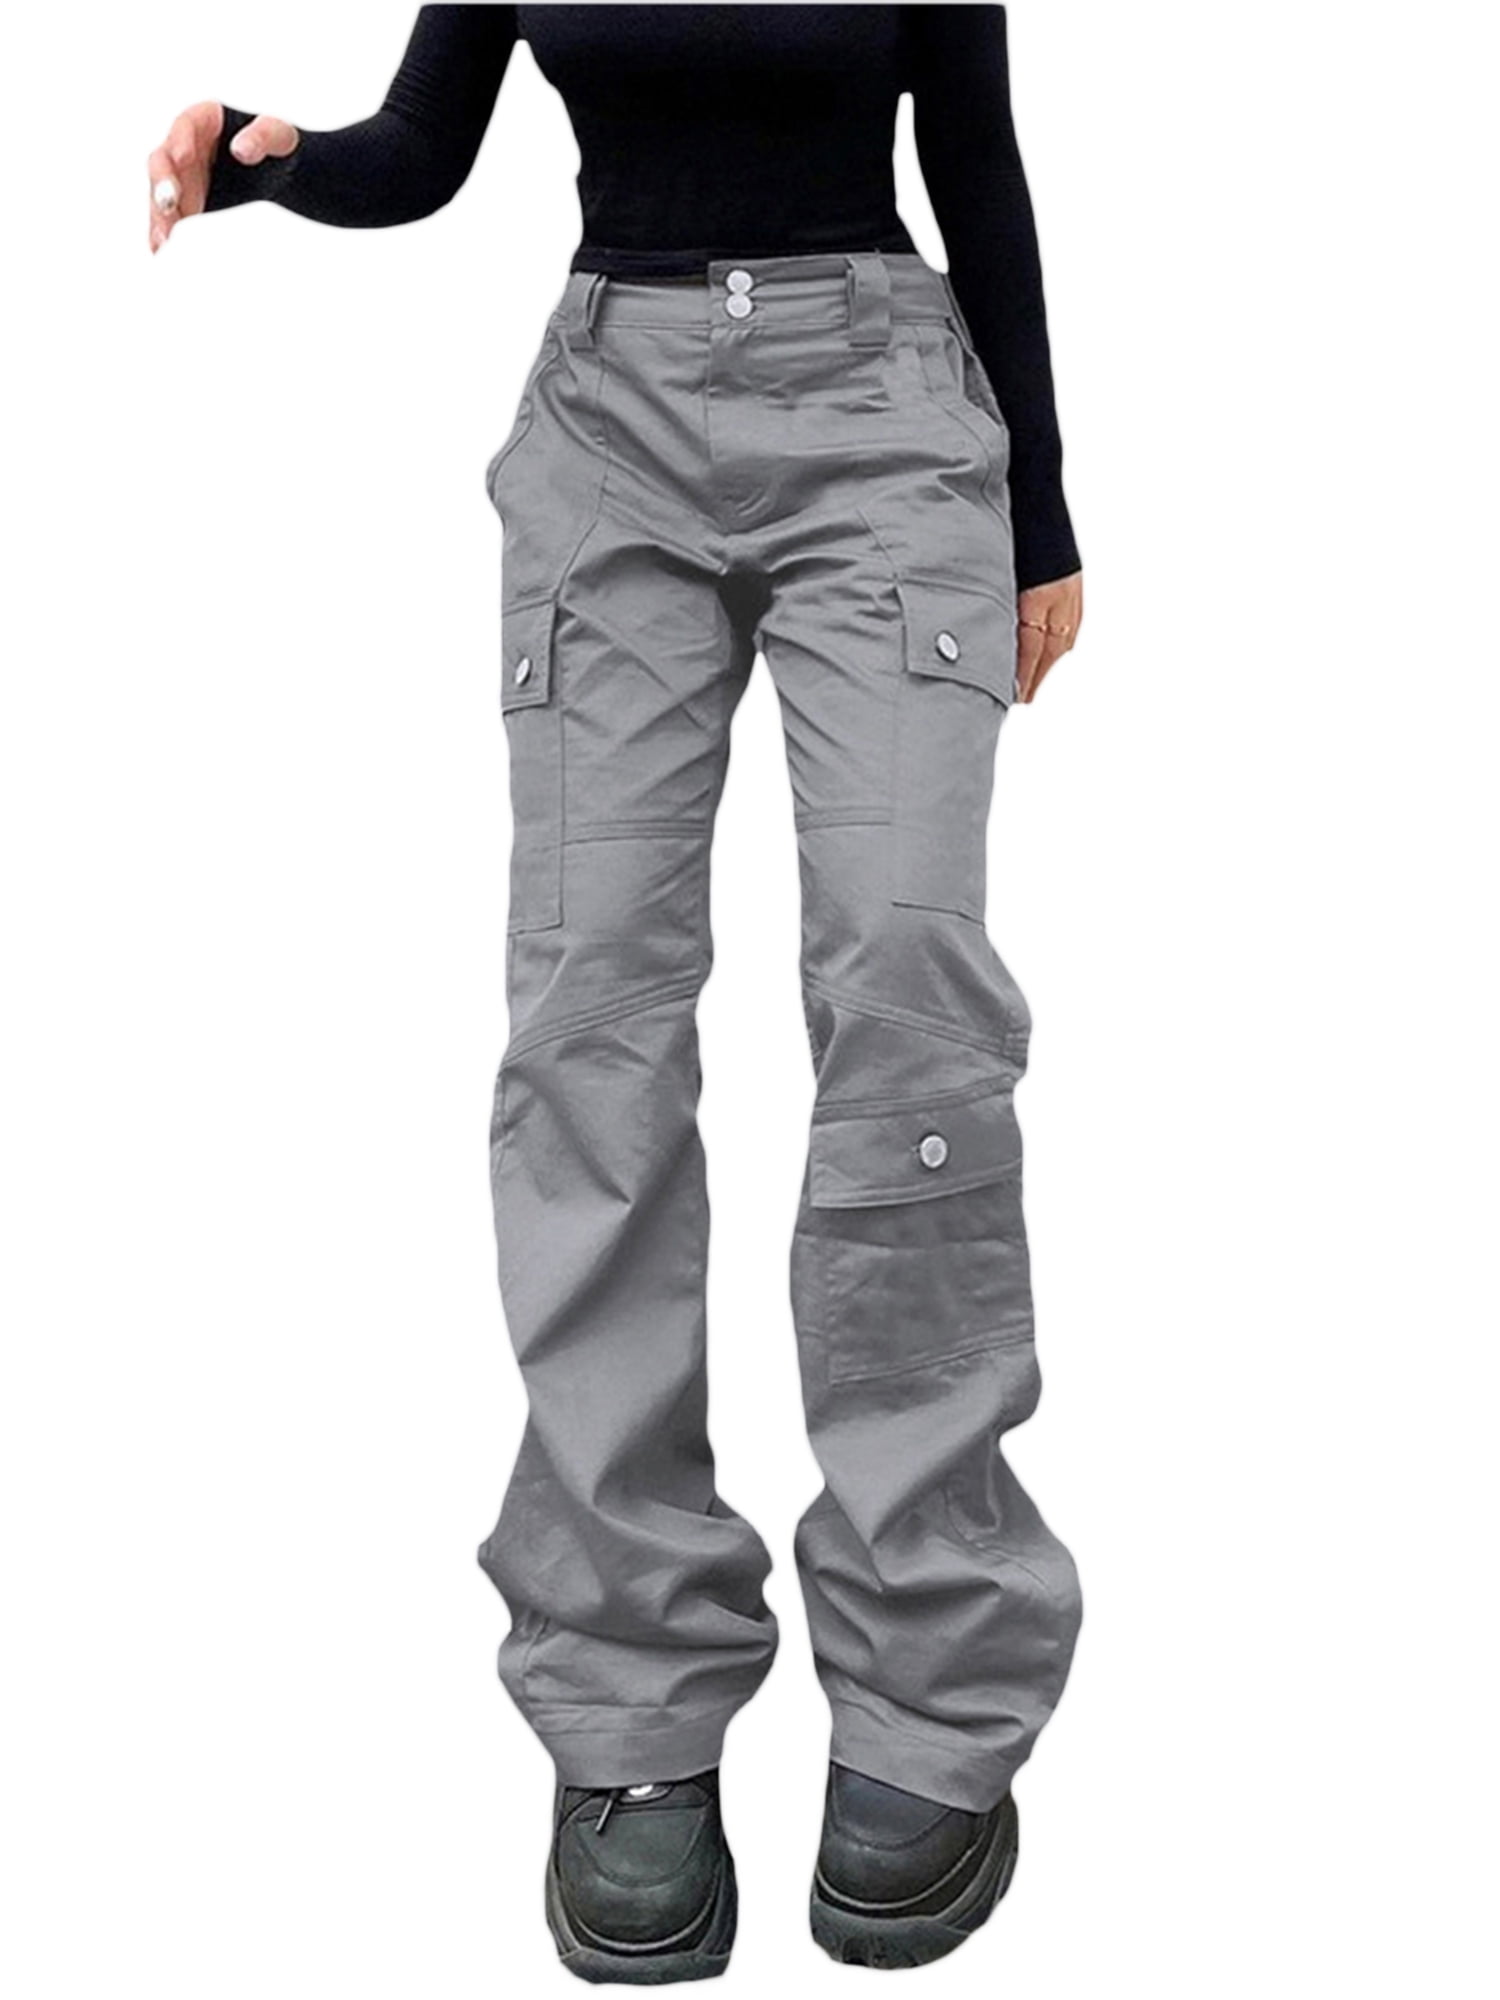 Women's Walking Trousers | Stretchy, Lightweight Hiking Trousers | Rohan